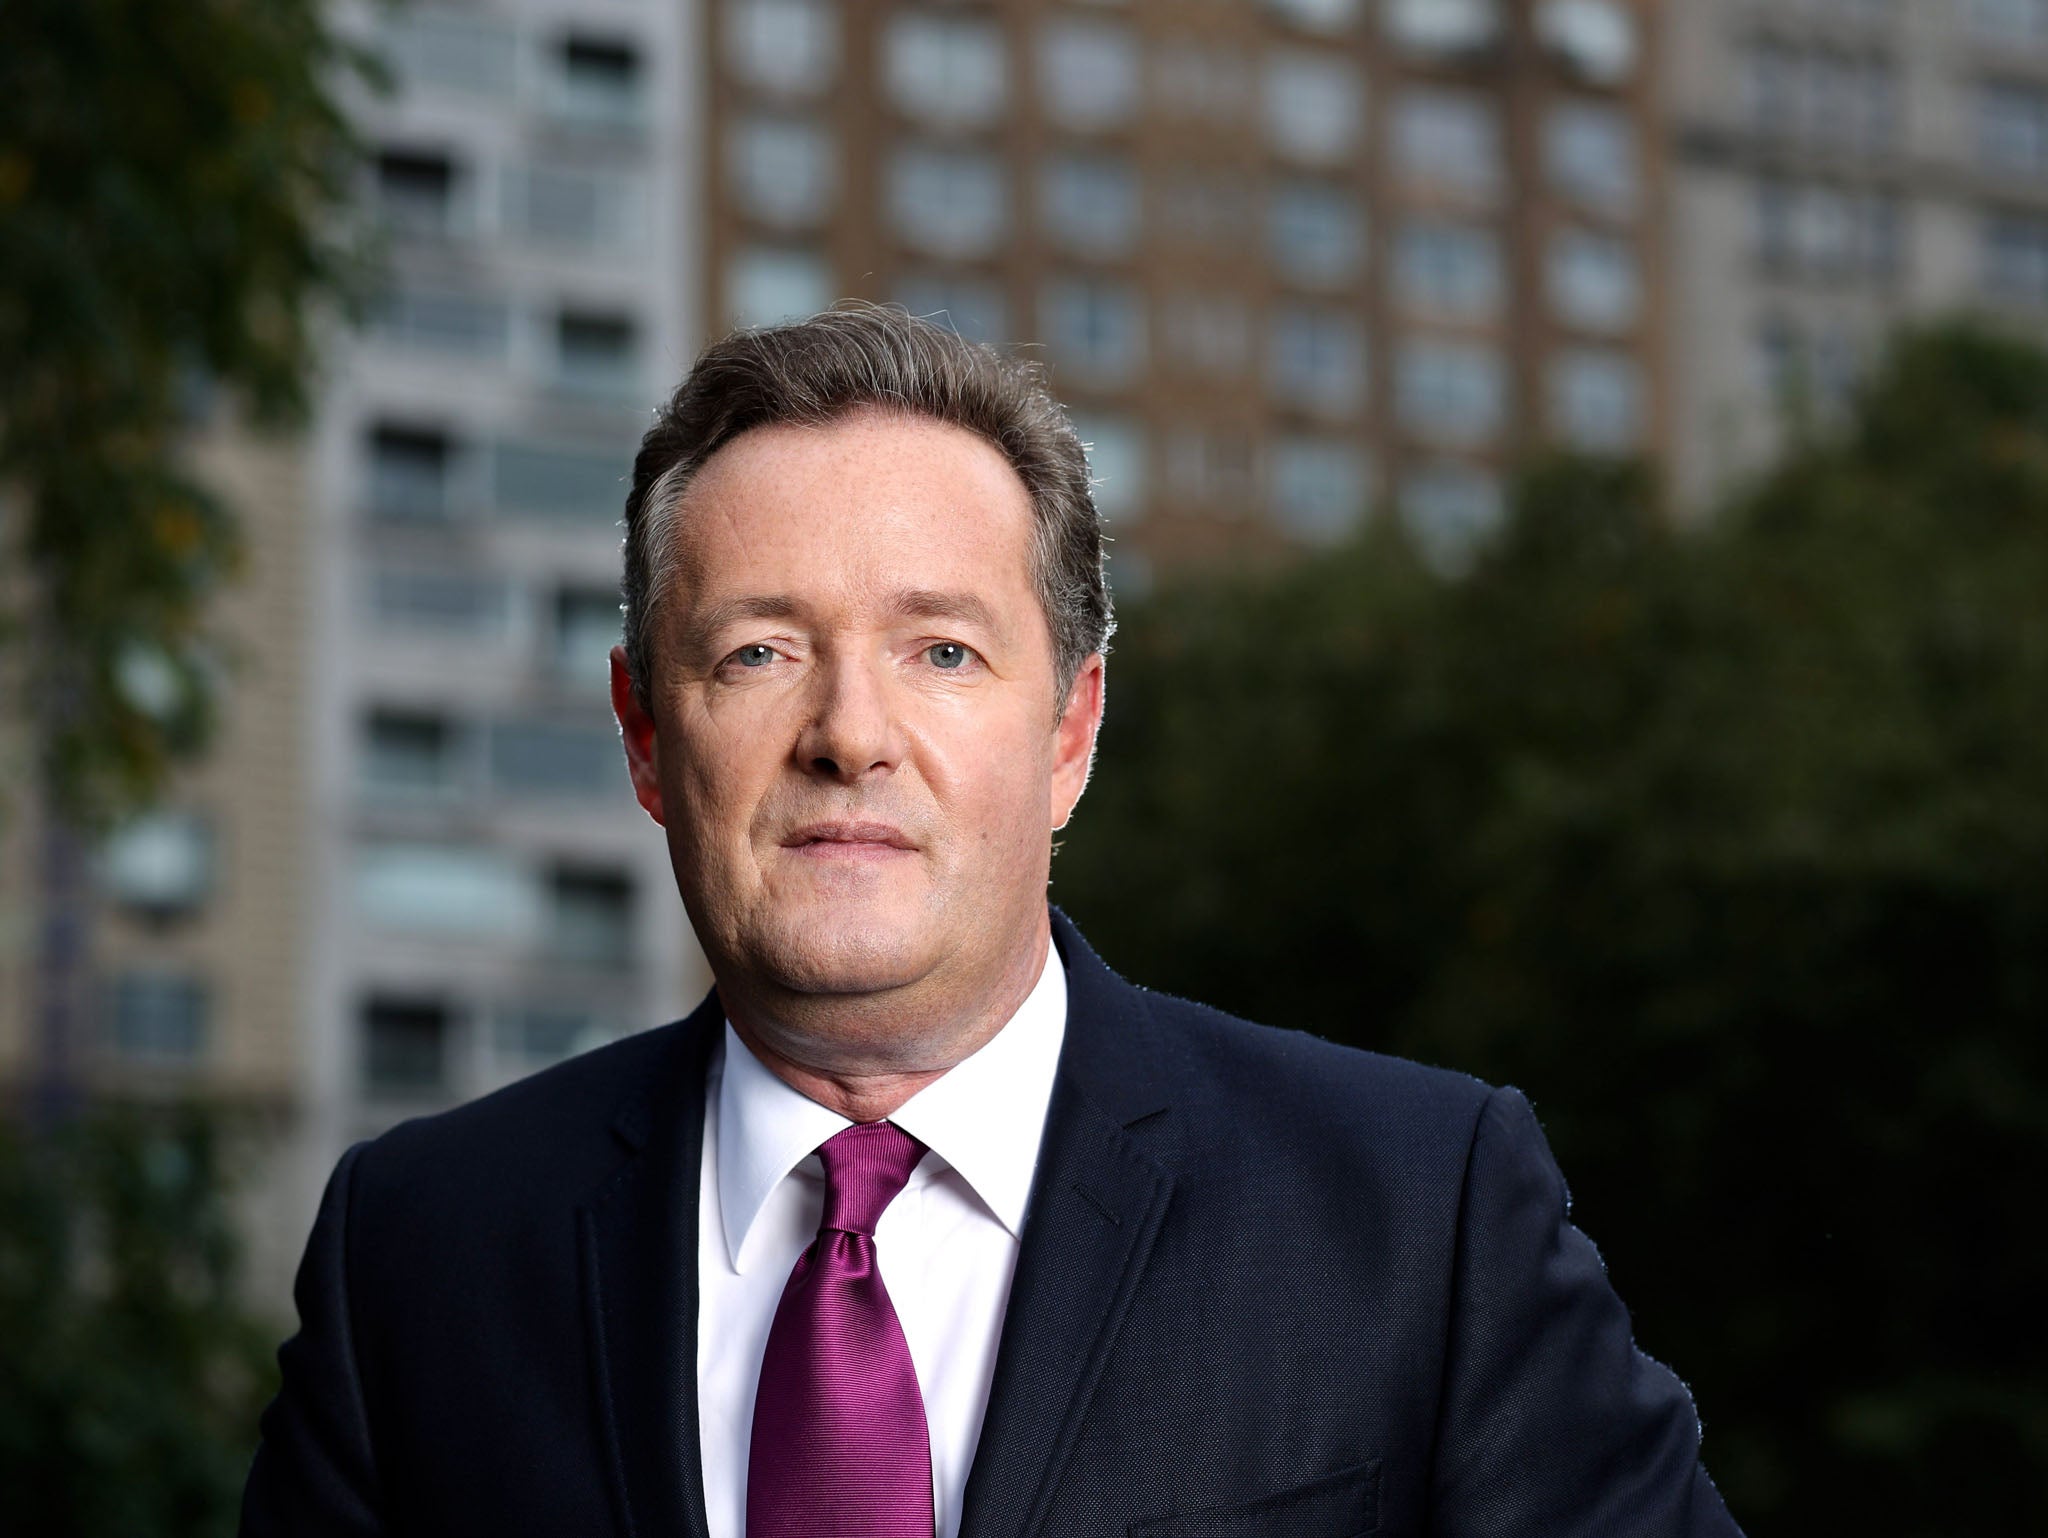 Piers Morgan tells Scots they might not have to suffer living on the same island as him if they vote ‘No’ to Scottish Independence